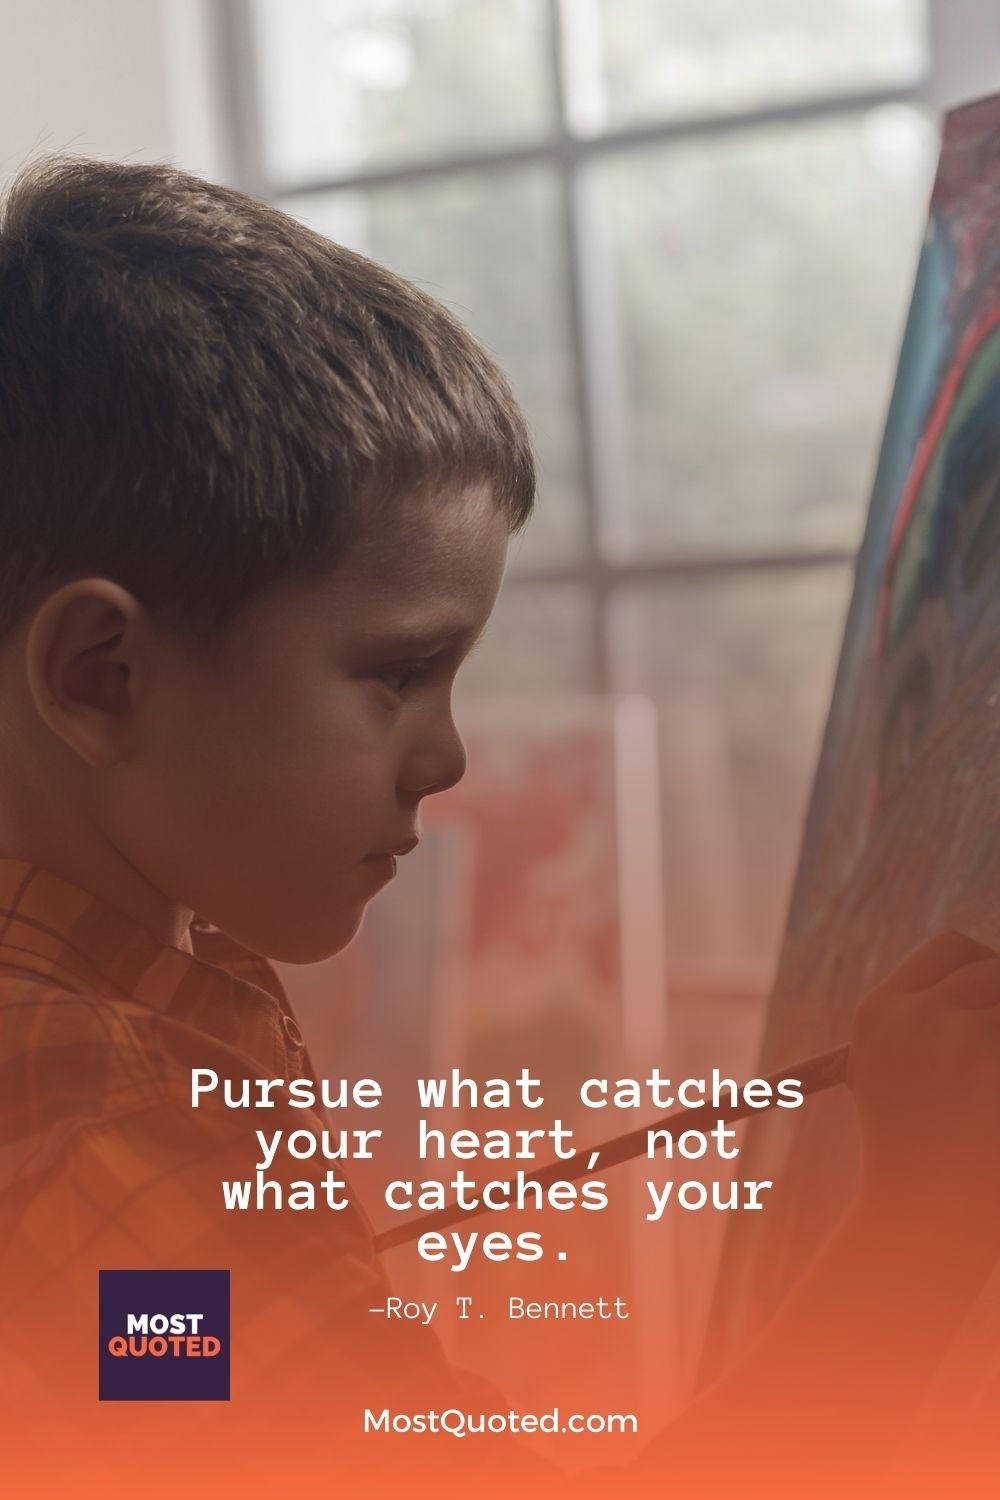 Pursue what catches your heart, not what catches your eyes. - Roy T. Bennett